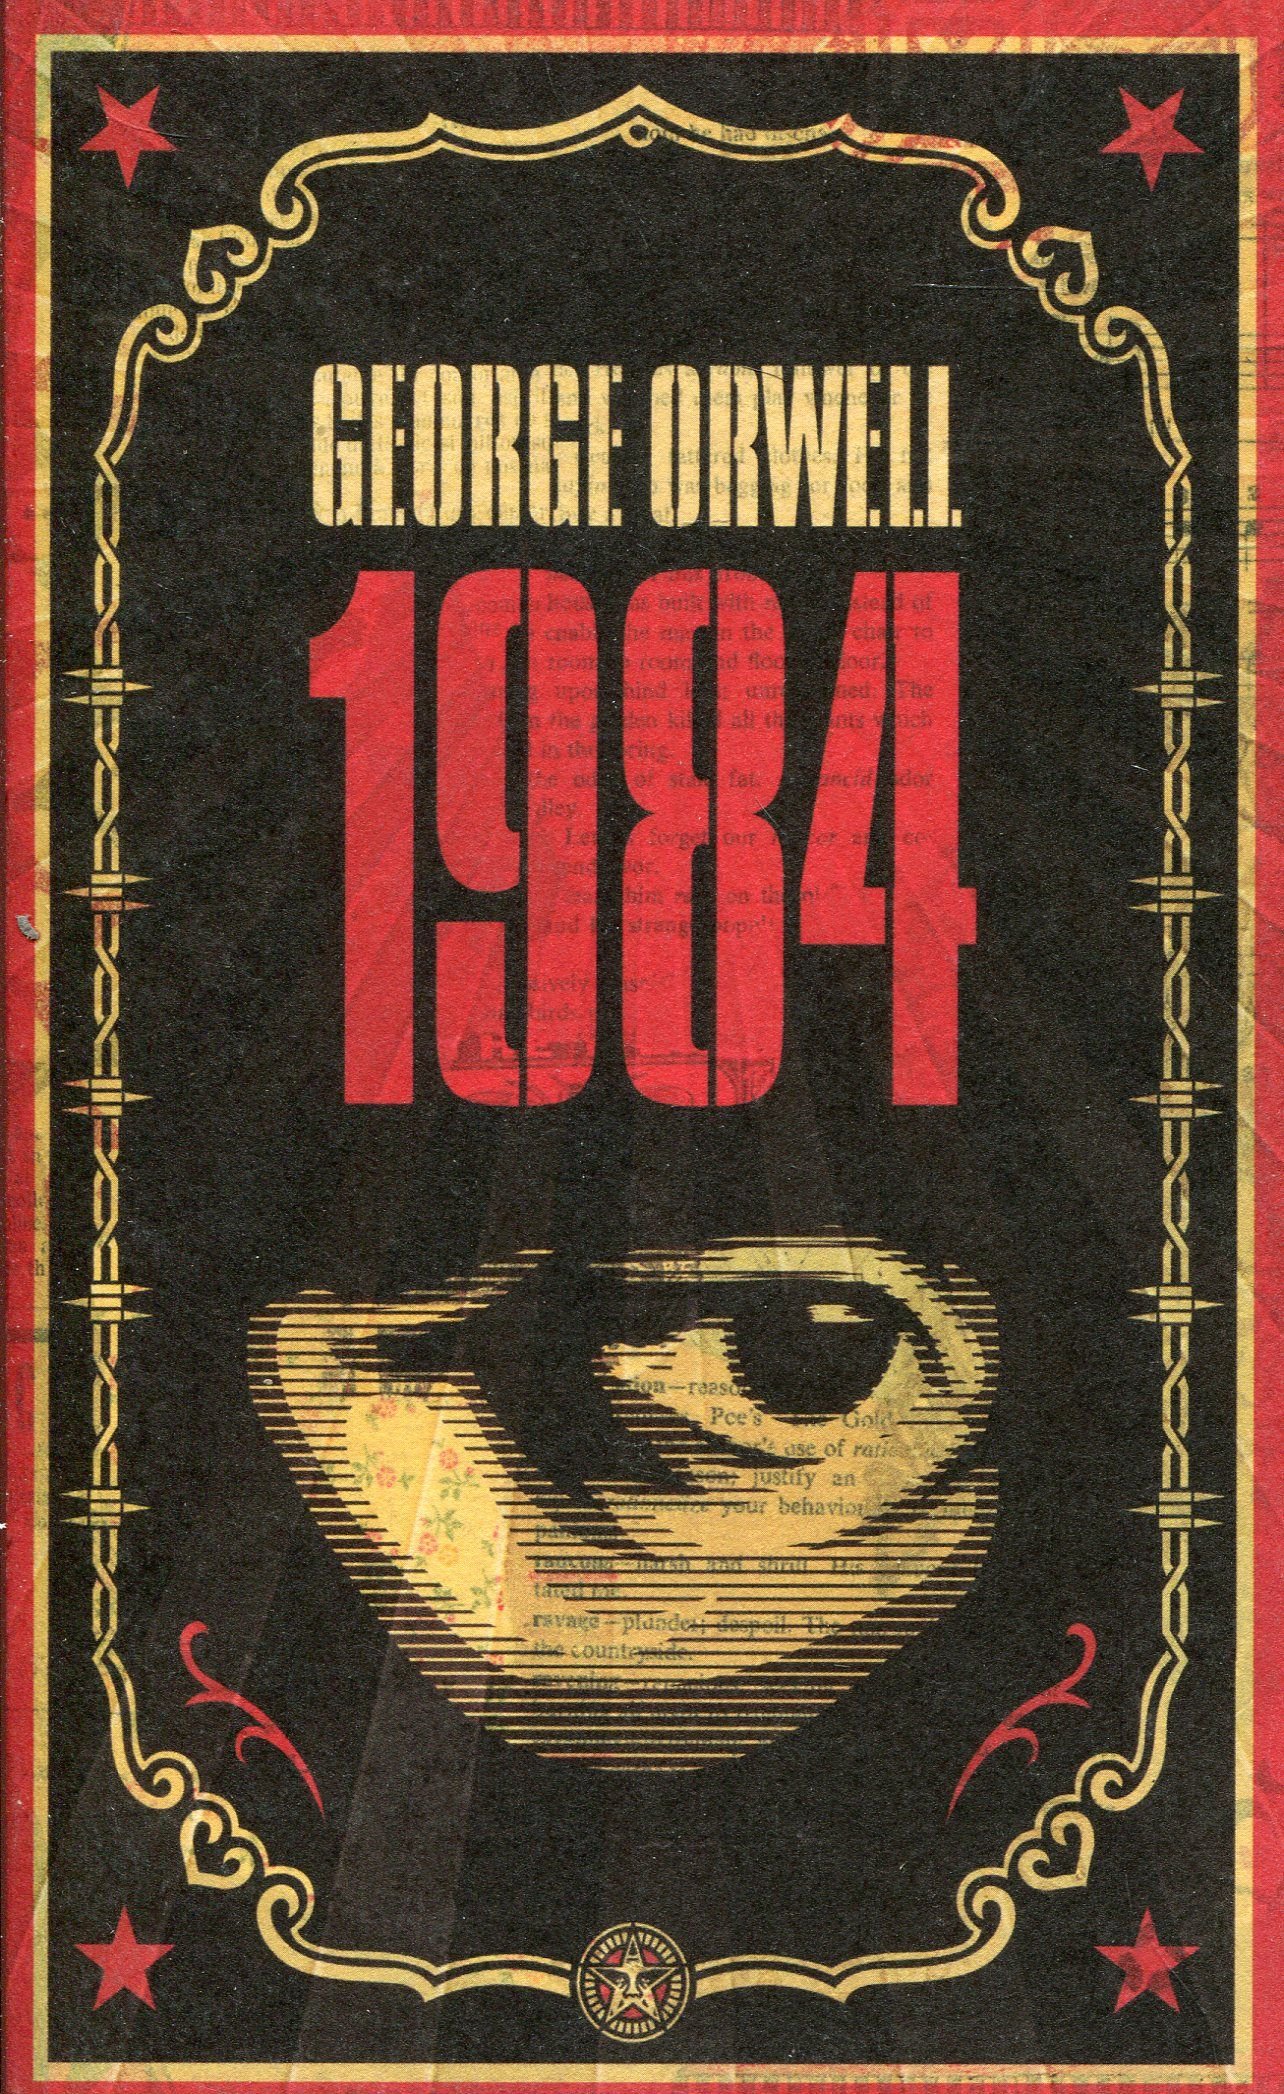 1984 at 70 – How has Orwell’s vision aged?